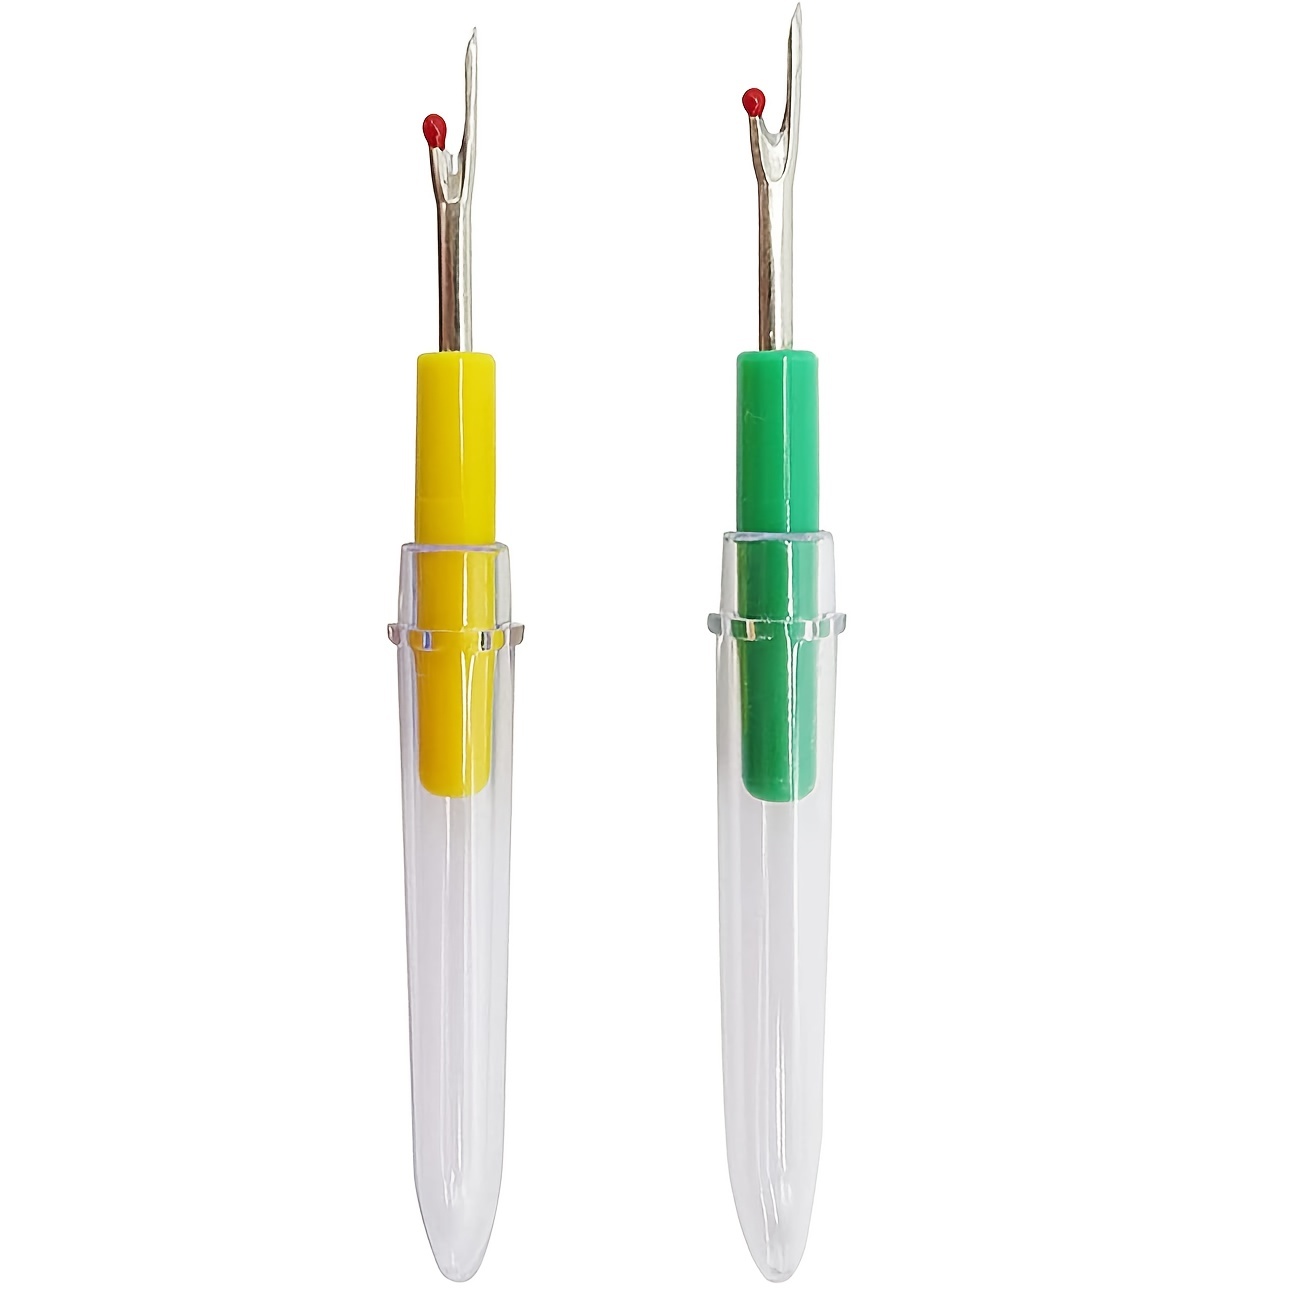 Seam Ripper Sewing Thread Removal  Sewing, Sewing notions, Sewing thread